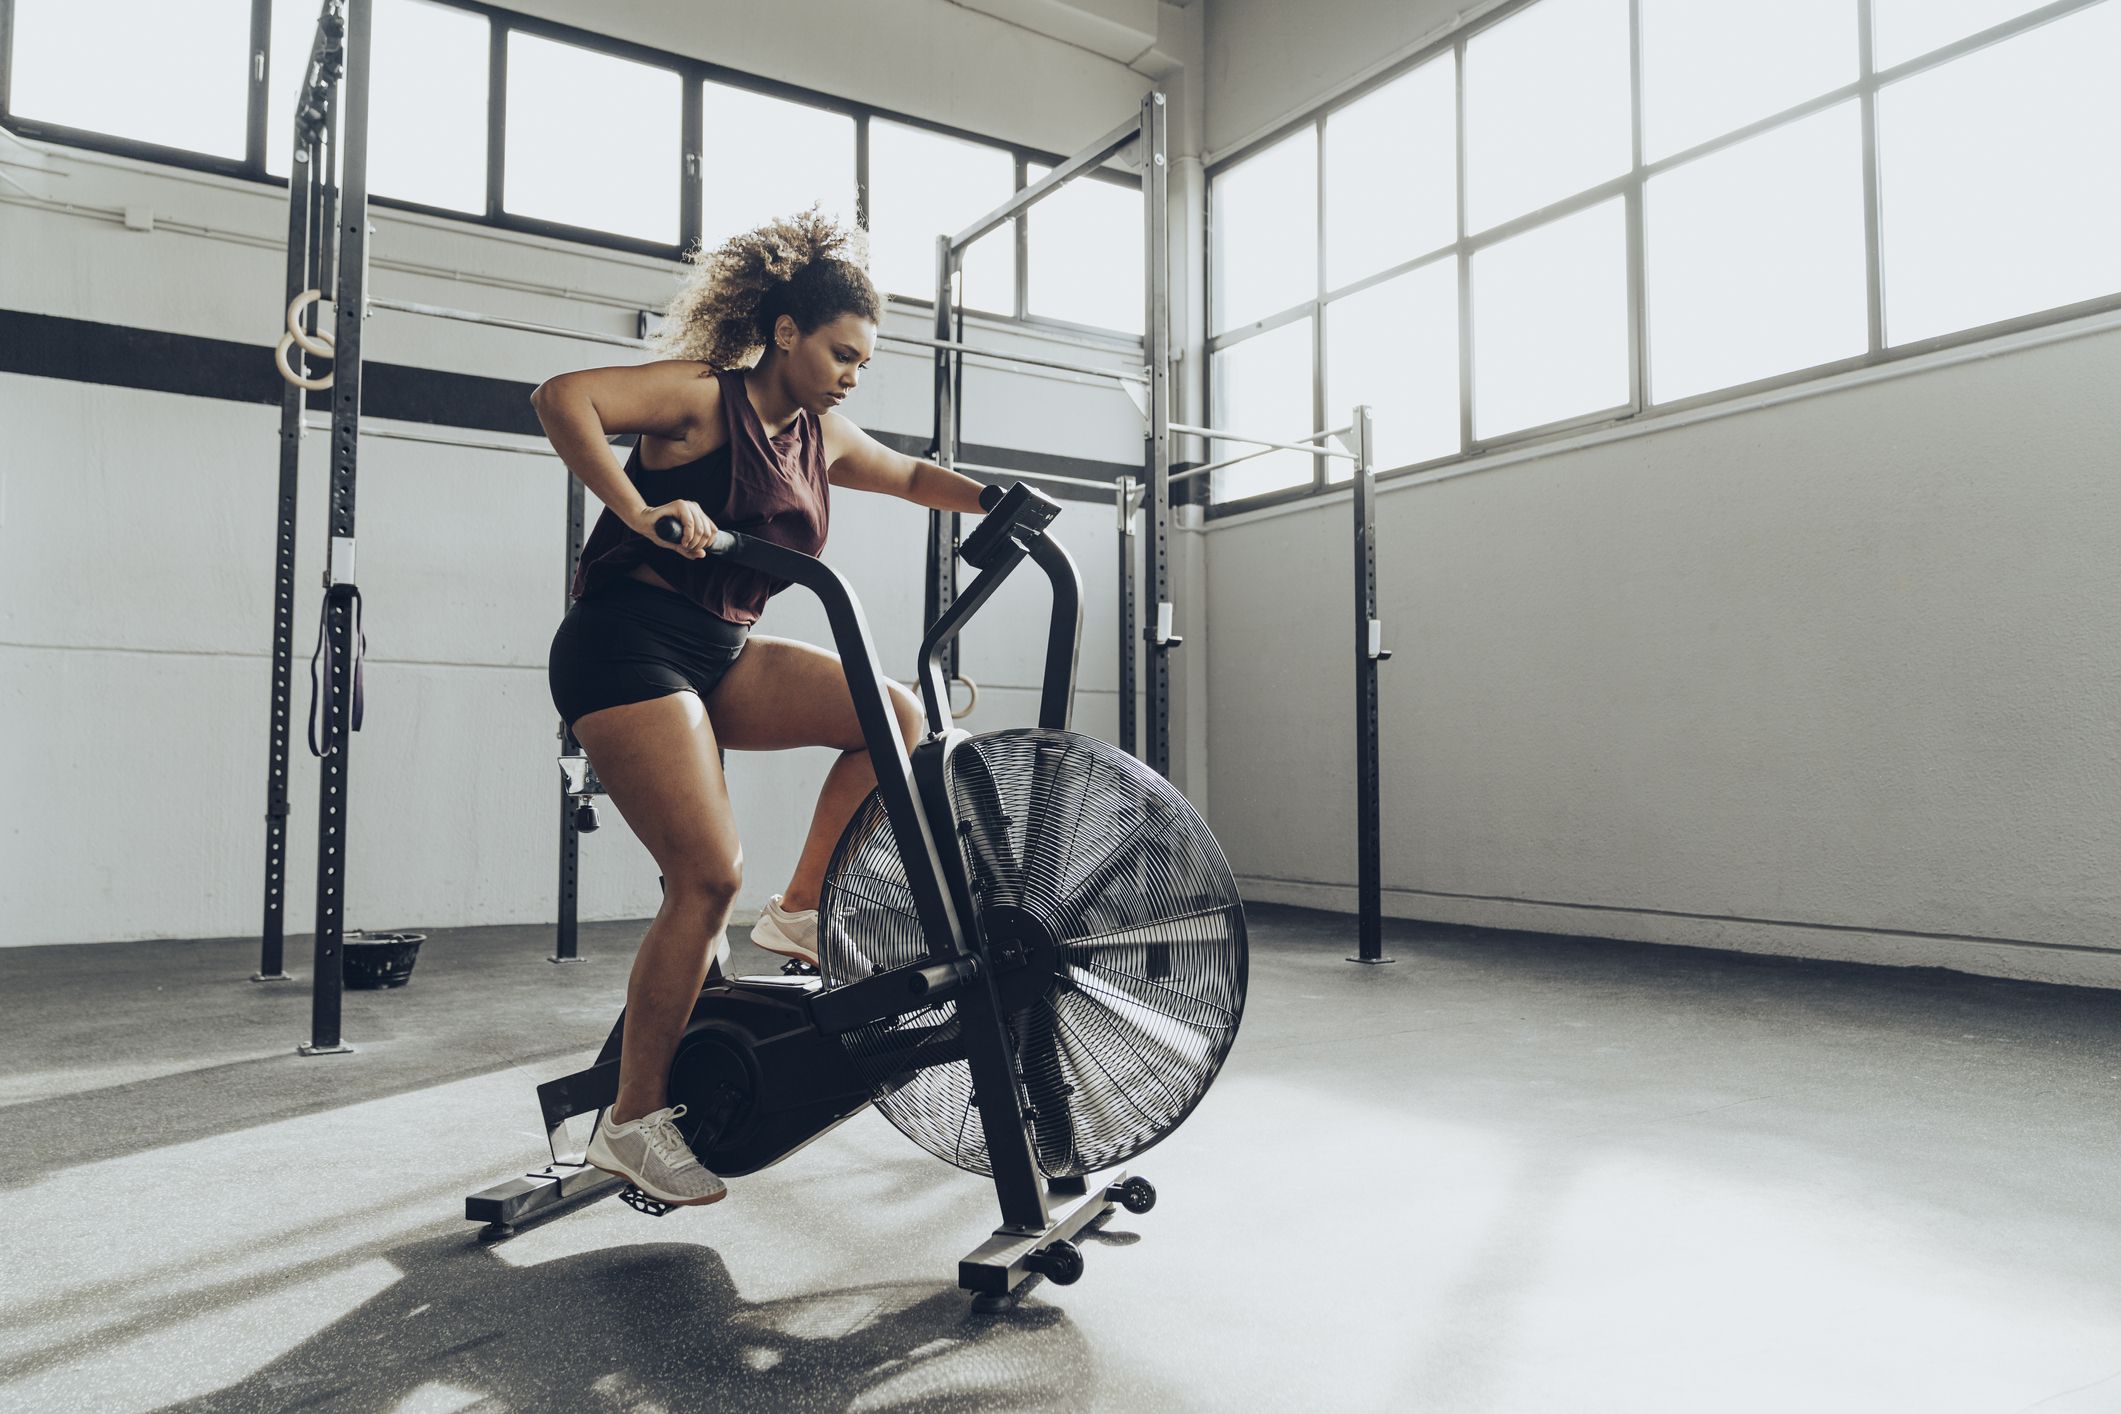 HIIT Benefits: 7 Reasons to Try High Intensity Interval Training